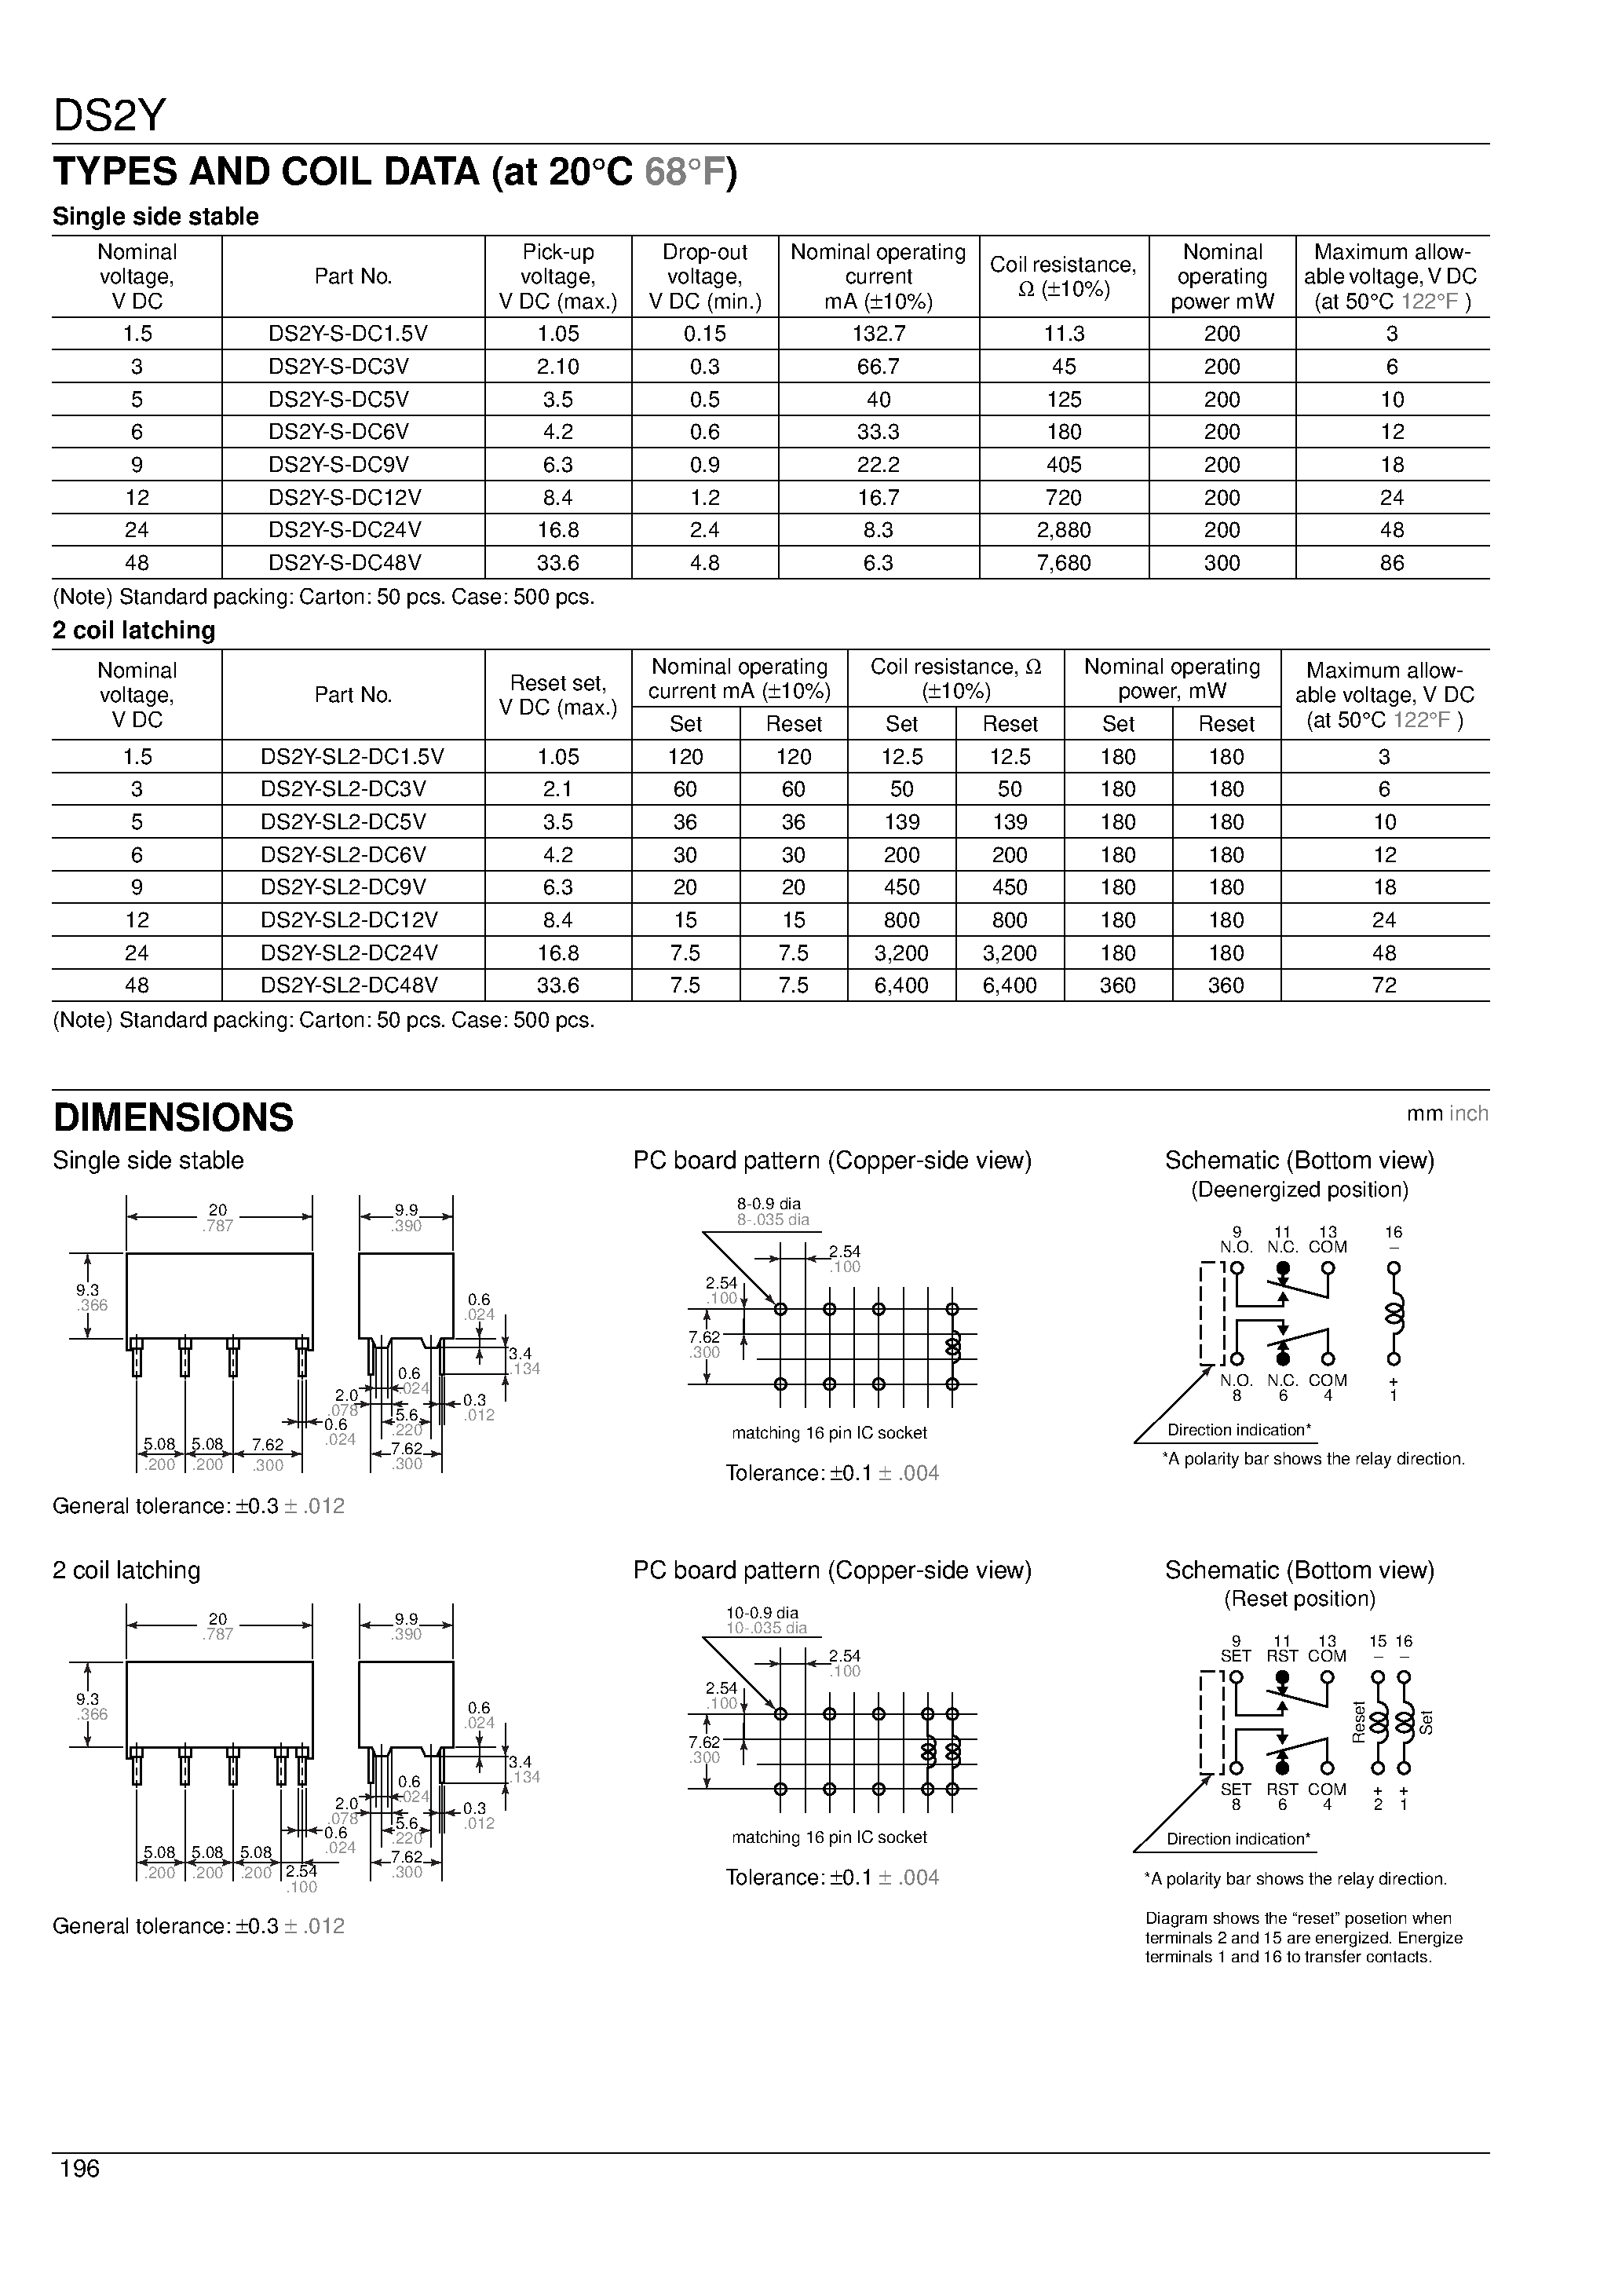 Datasheet DS2Y-SL2-DC1.5V - 2 Form C contact High sensitivity-200 mW nominal operating power page 2